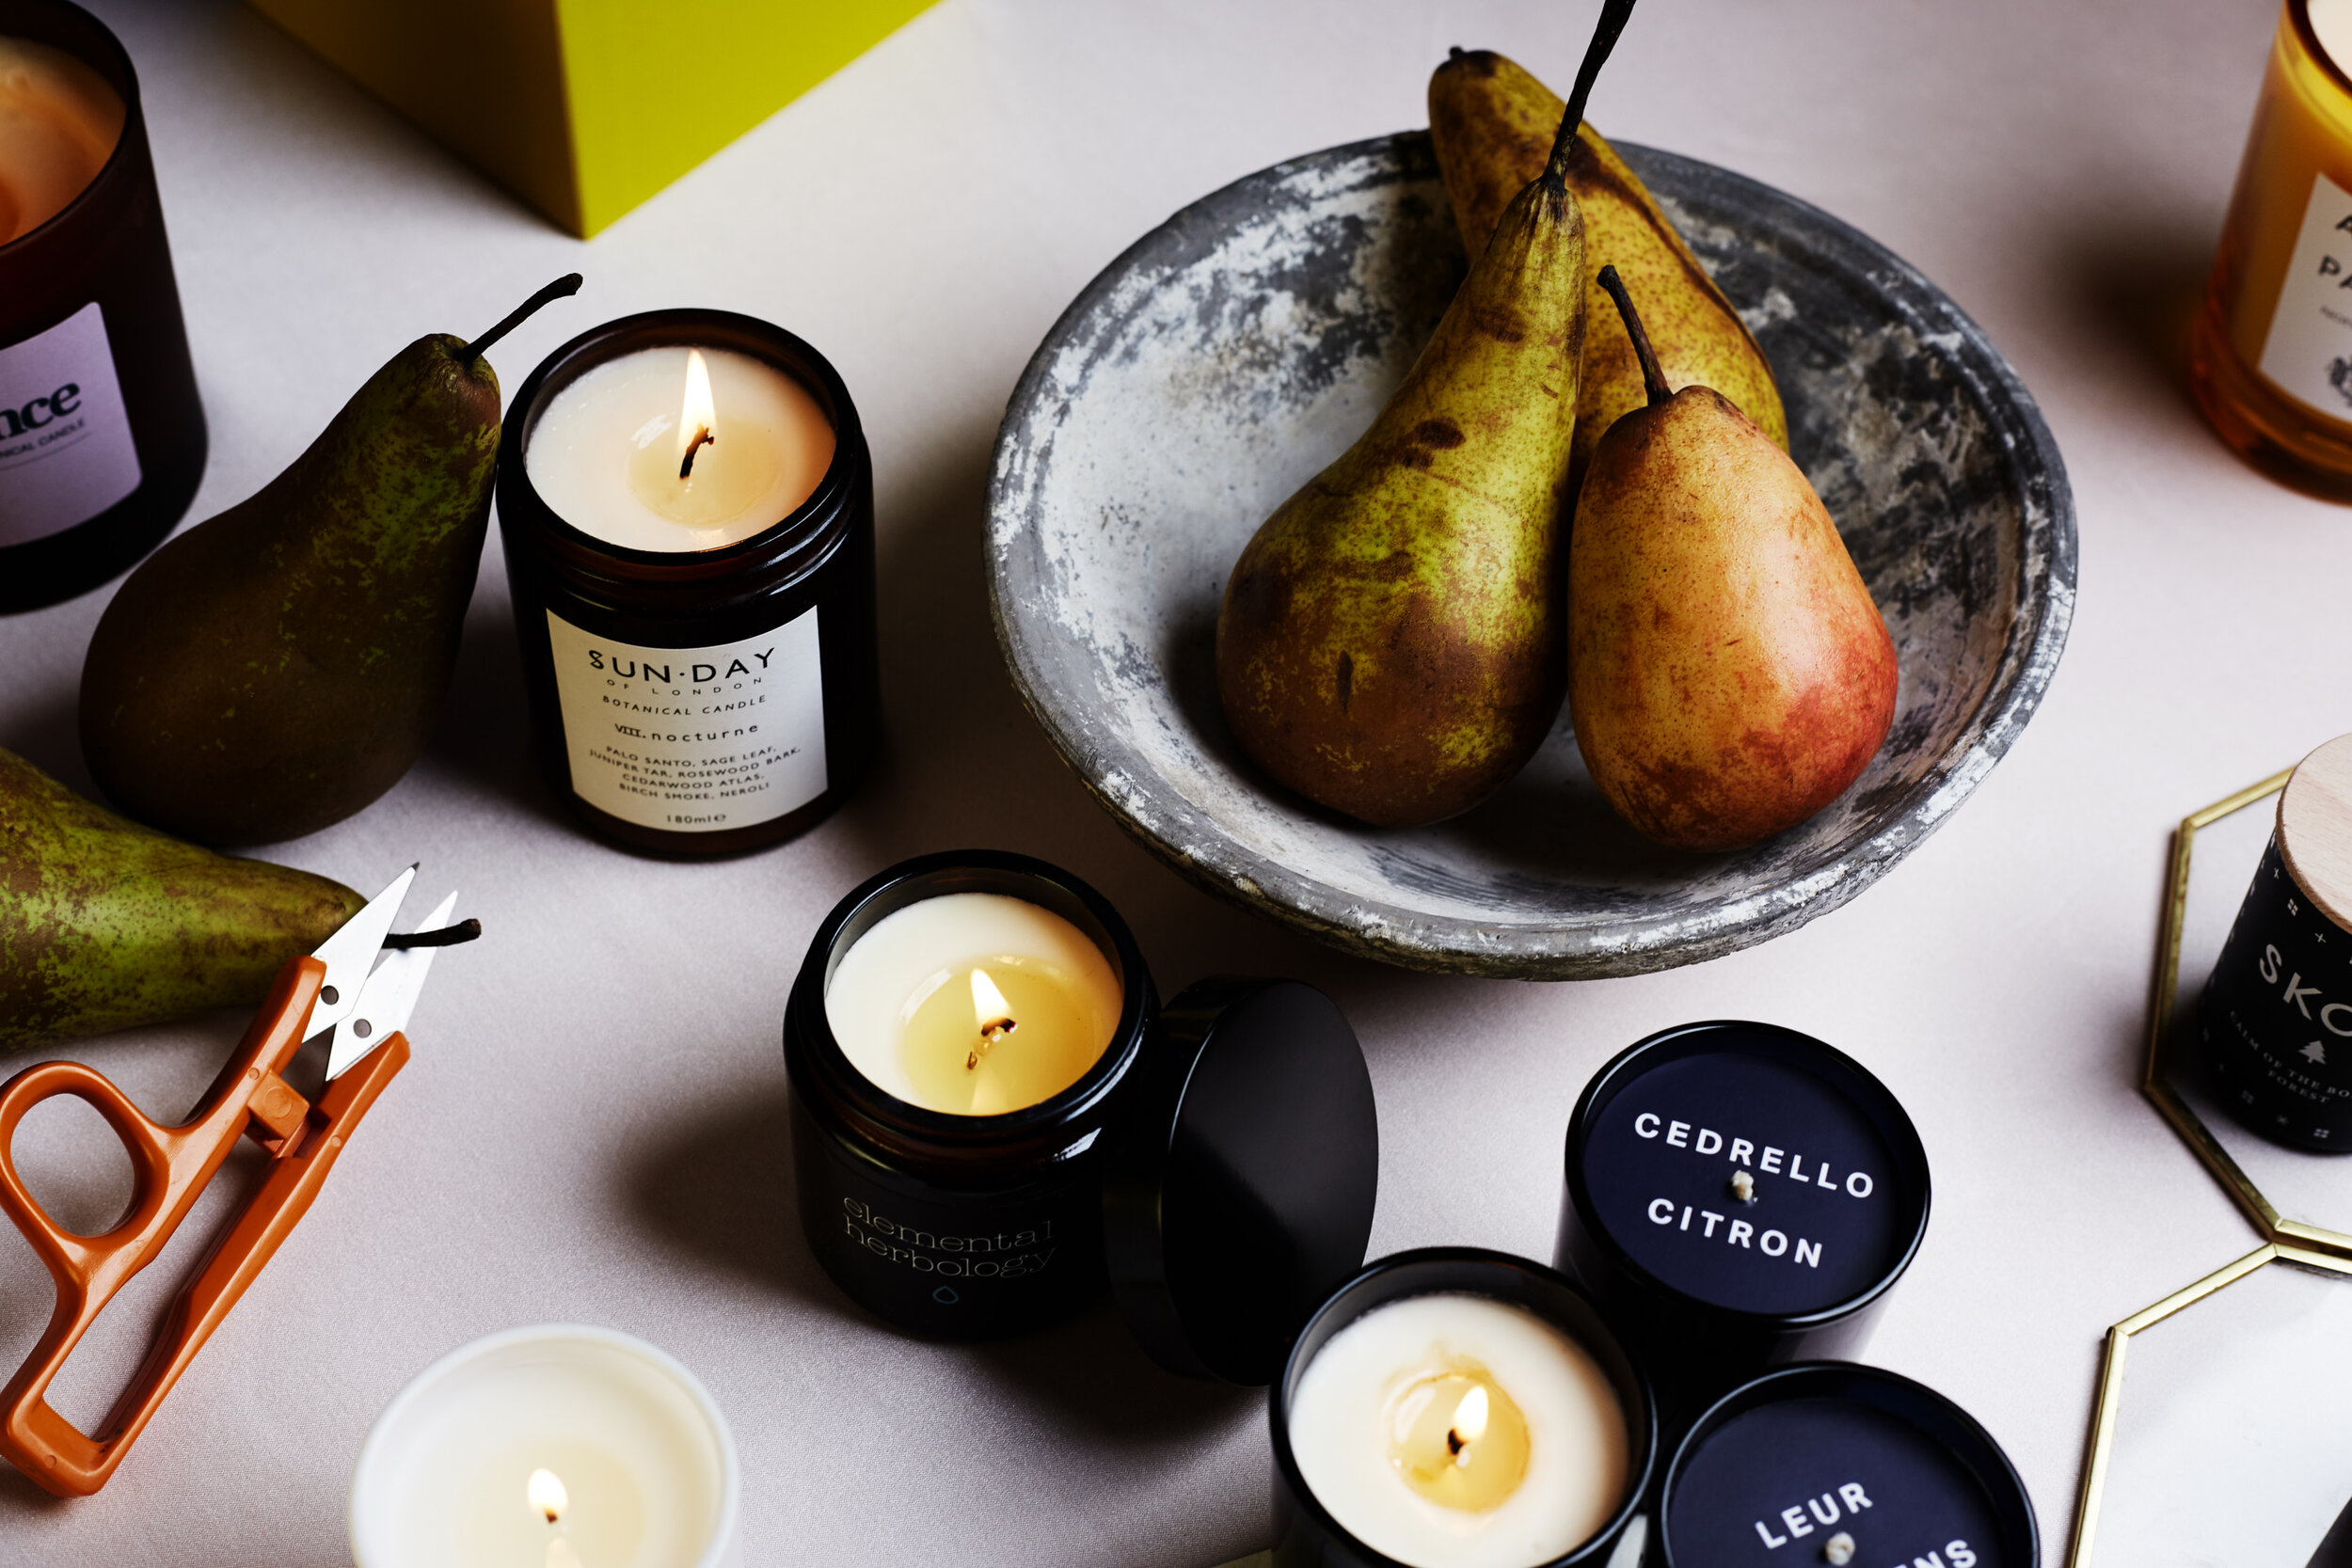  SUN.DAY  VIII. Nocturne Candle  £26.00  ELEMENTAL HERBOLOGY  Soothe Aromatherapy Candle  £25  AULI  Luxury Candle Gift Set  £52 